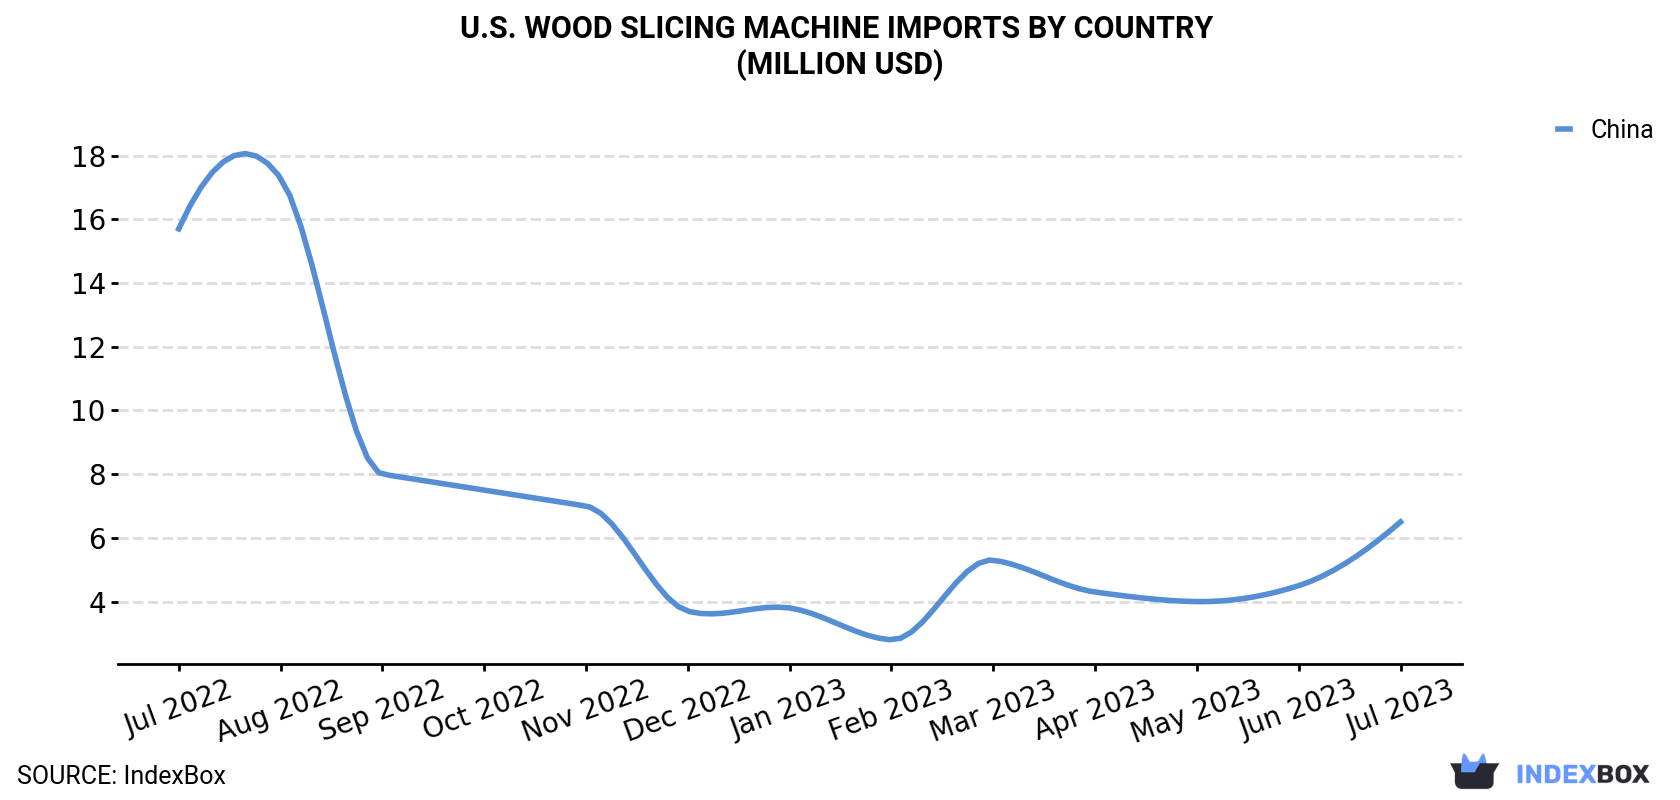 U.S. Wood Slicing Machine Imports By Country (Million USD)